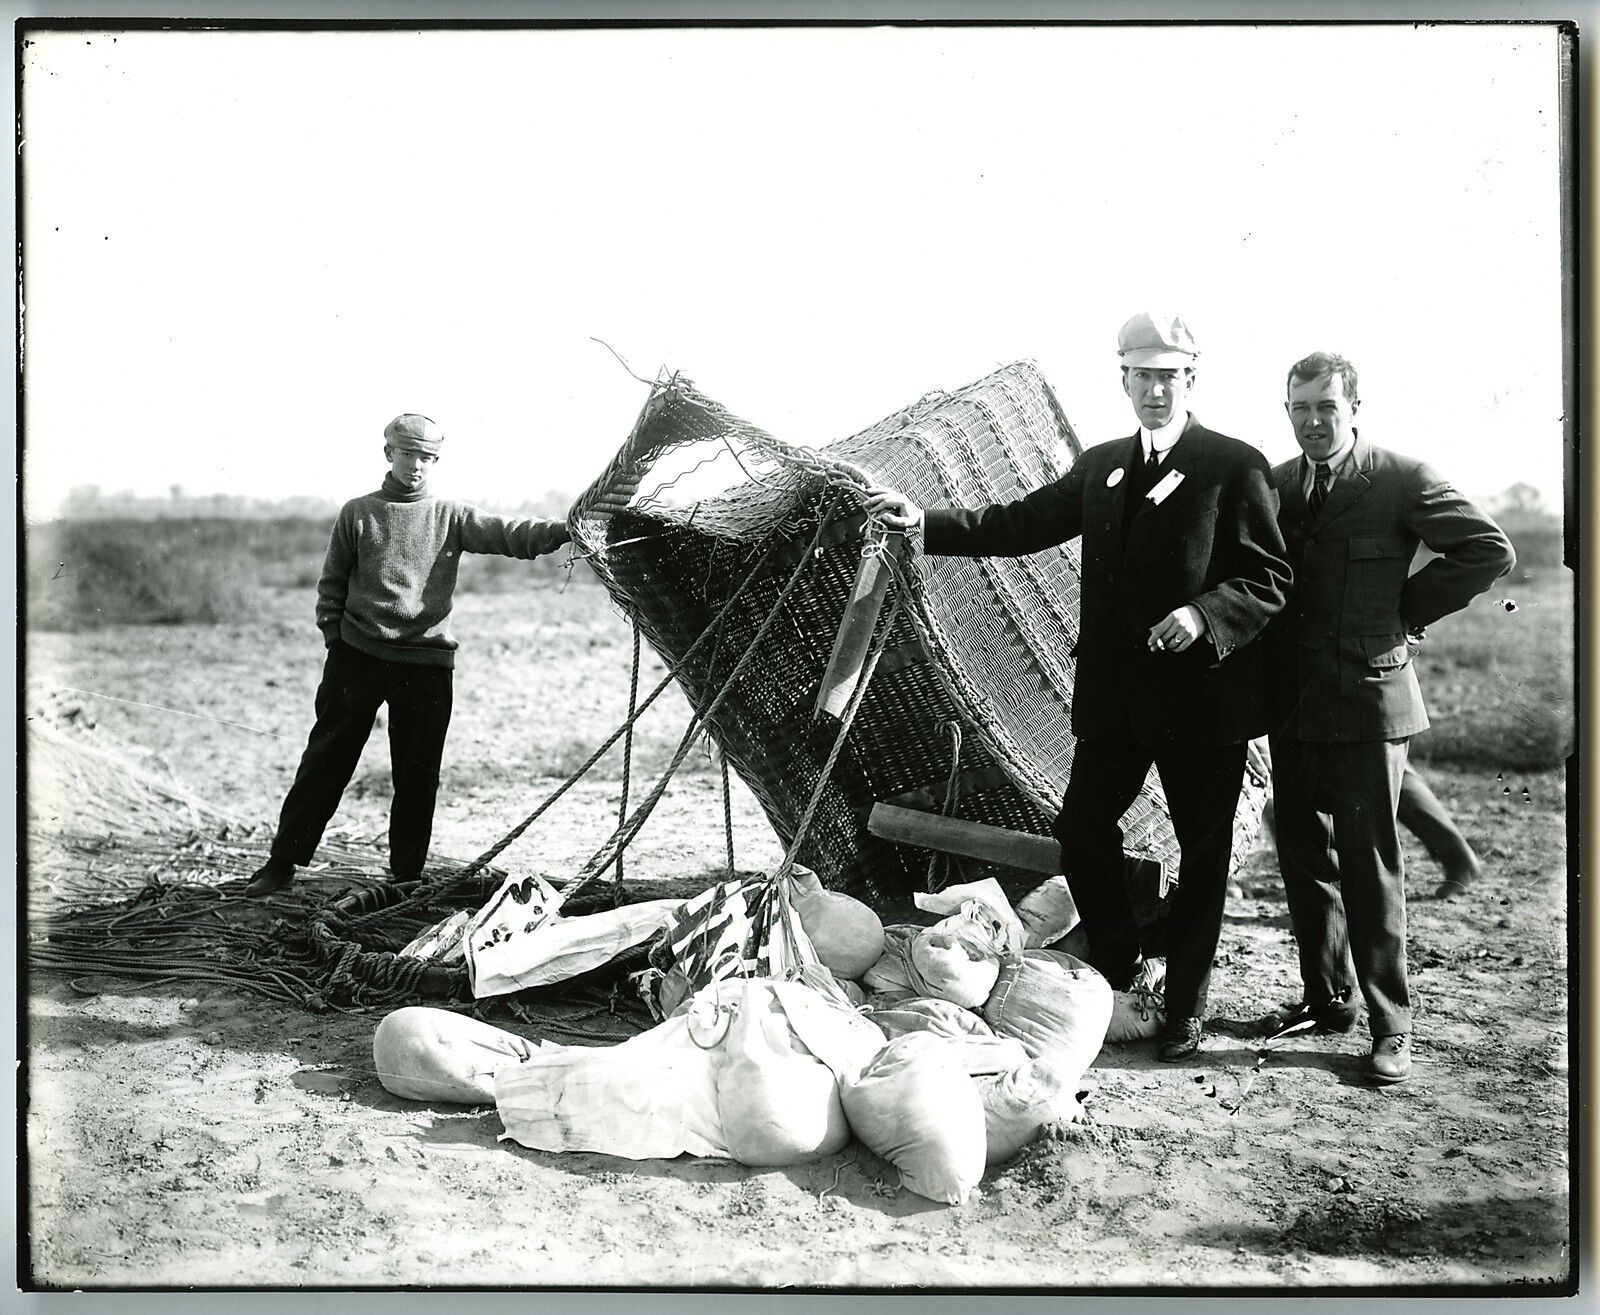 c.1900s EARLY AVIATION with CRASHED HOT AIR BALLOON on GROUND~ANTIQUE 8x10 PHOTO